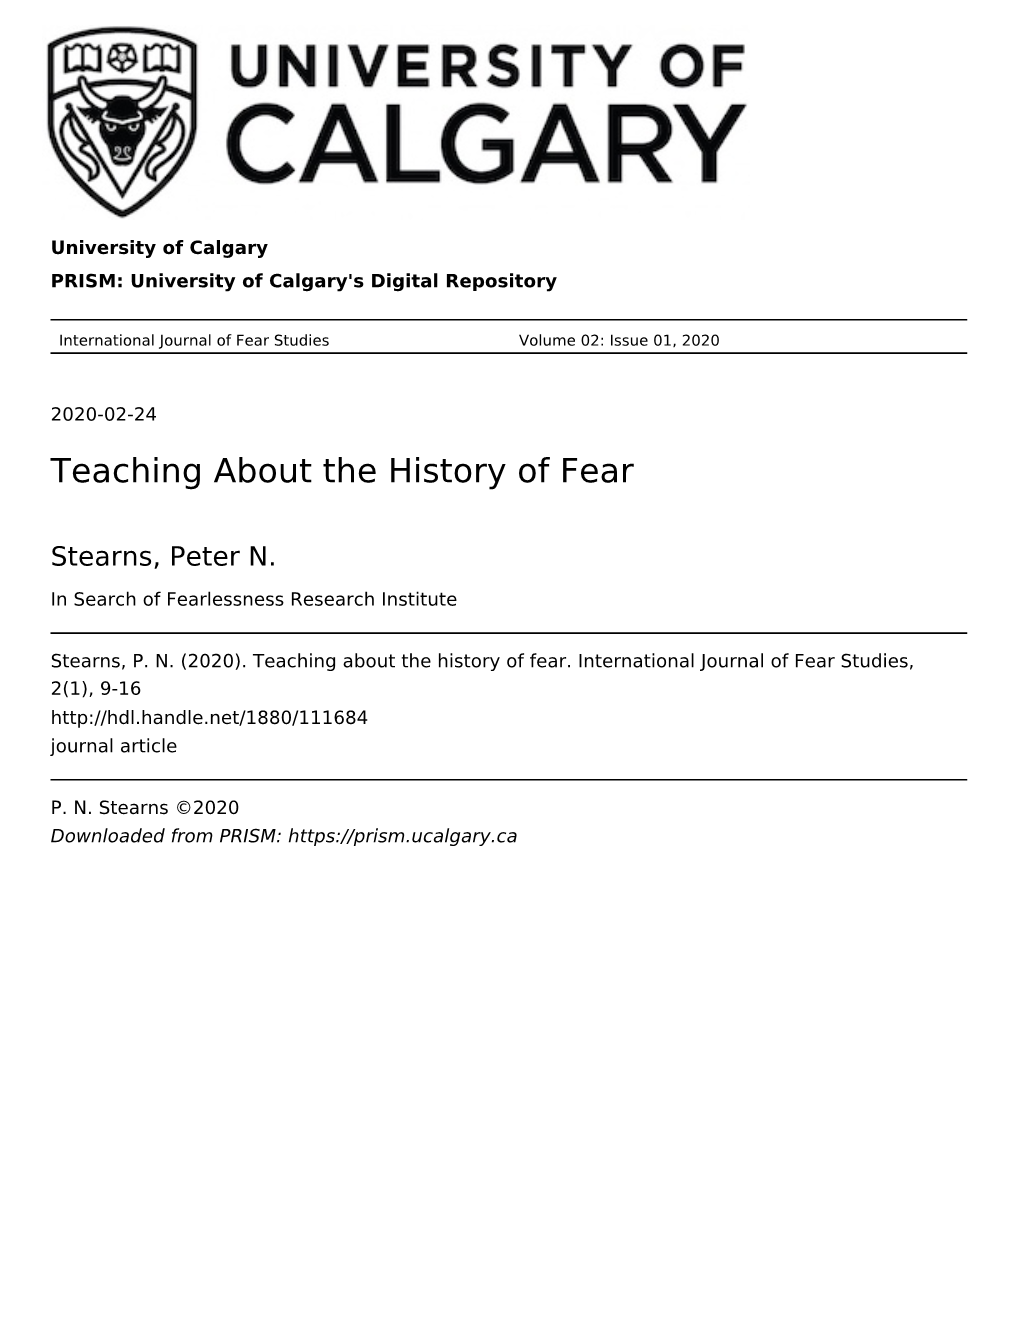 Teaching About the History of Fear